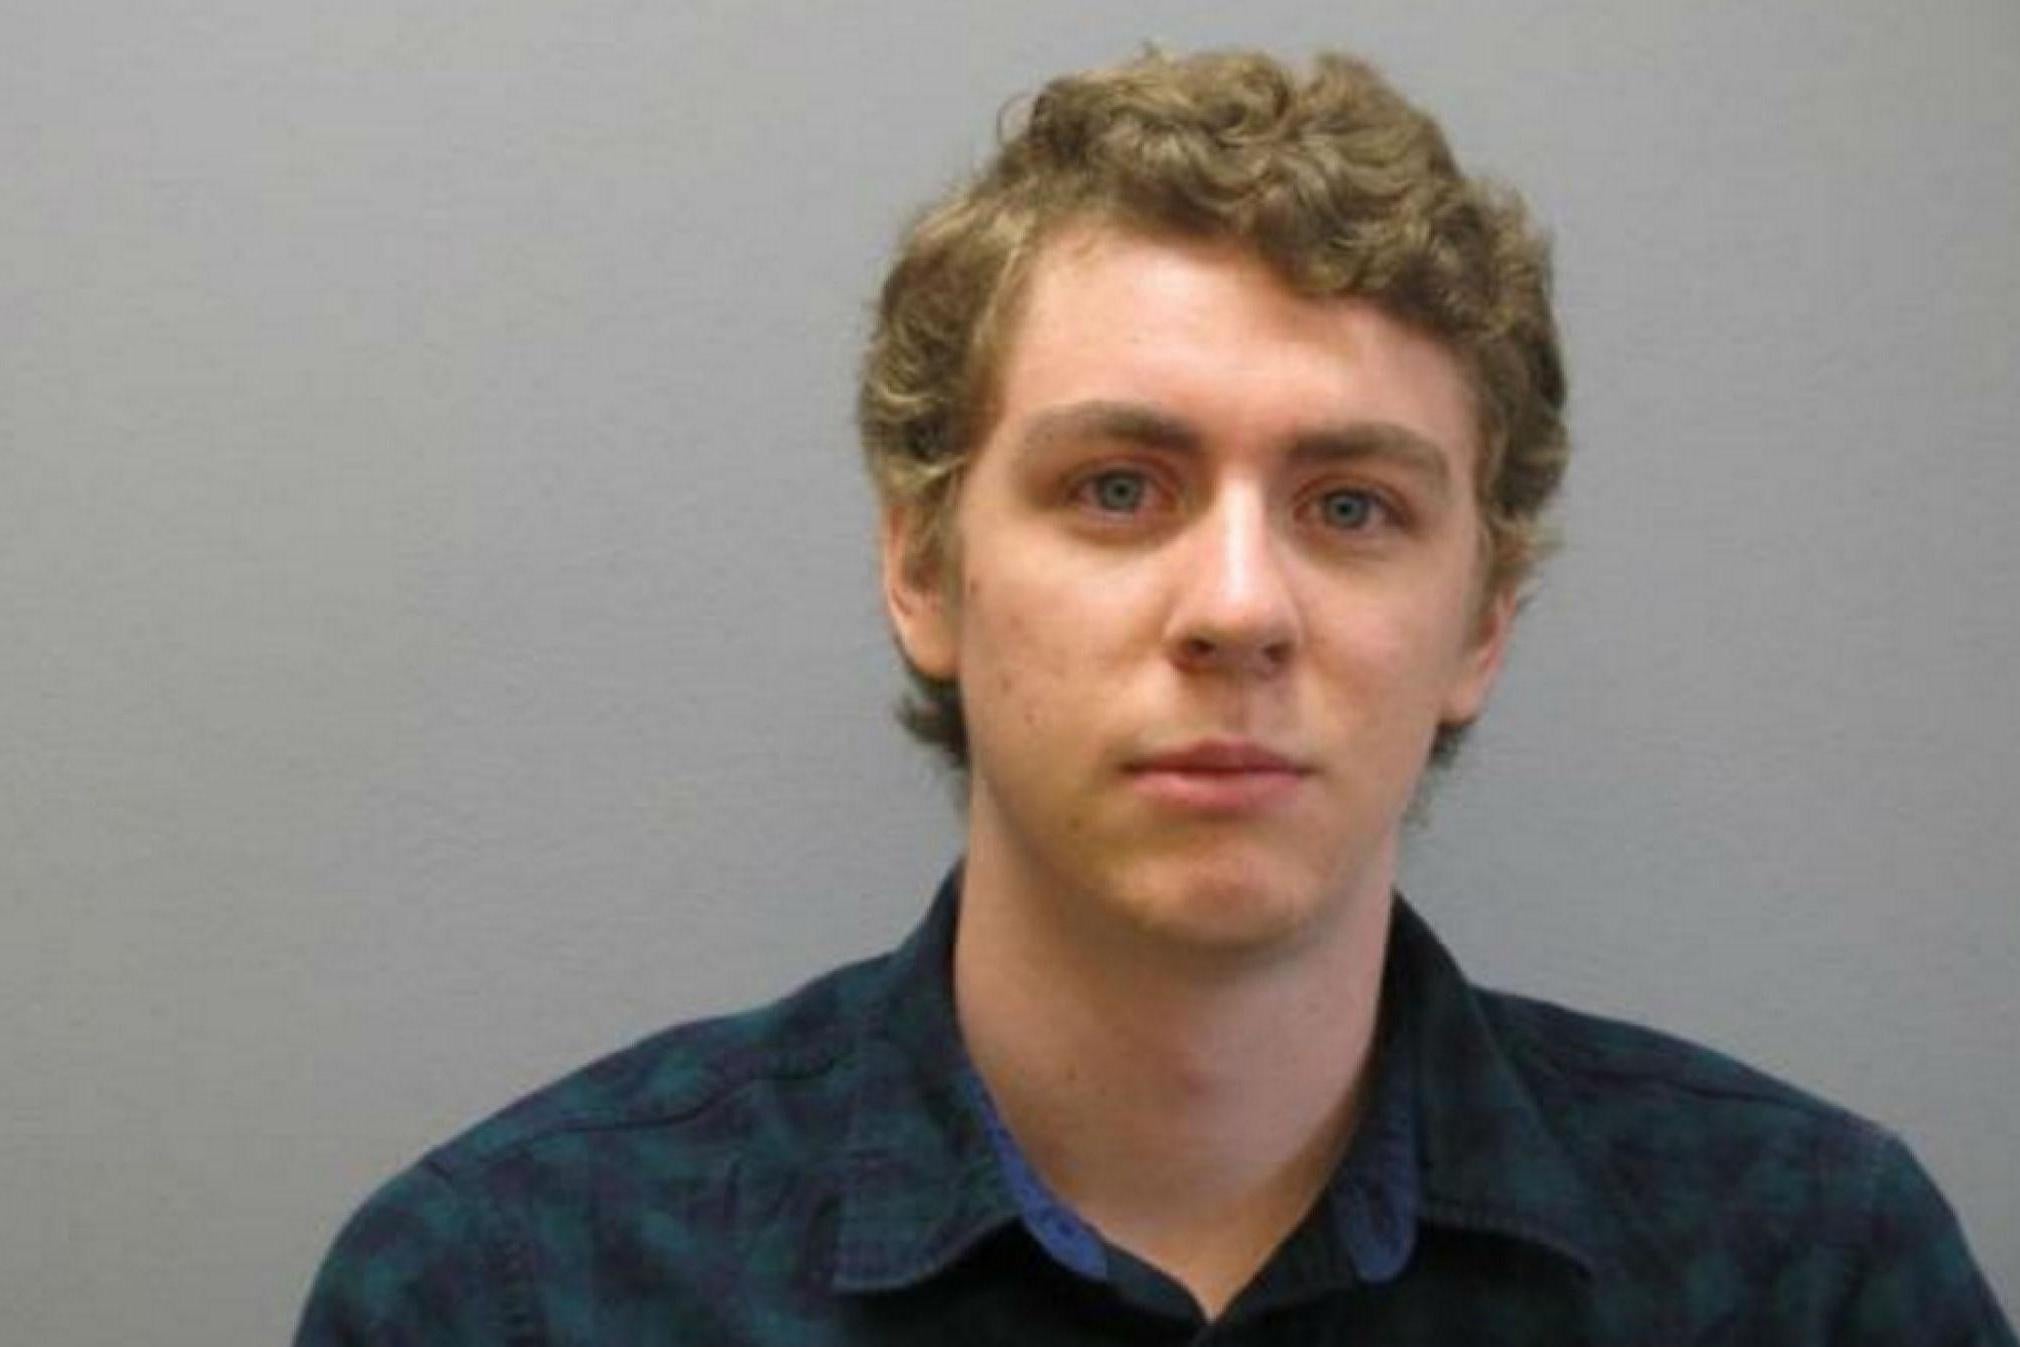 An updated photo of Brock Turner now appears on the Ohio Attorney General's office website, where he will be listed as a sex offender for life